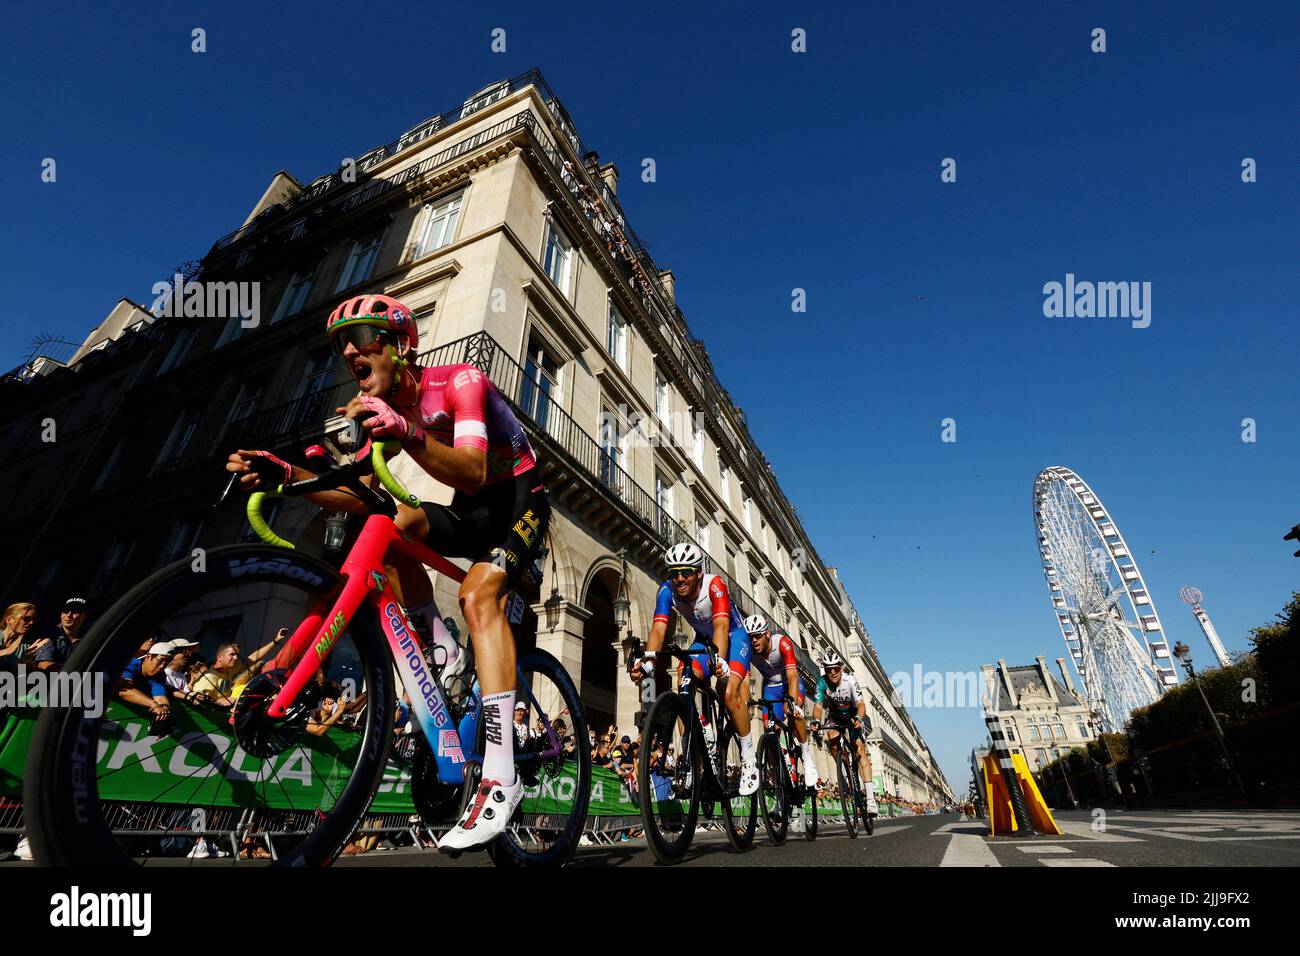 Cycling - Tour de France - Stage 21 - Paris La Defense Arena to Champs-Elysees - France - July 24, 2022 EF Education - Easypost's Jonas Rutsch in action with riders during stage 21 REUTERS/Gonzalo Fuentes Stock Photo